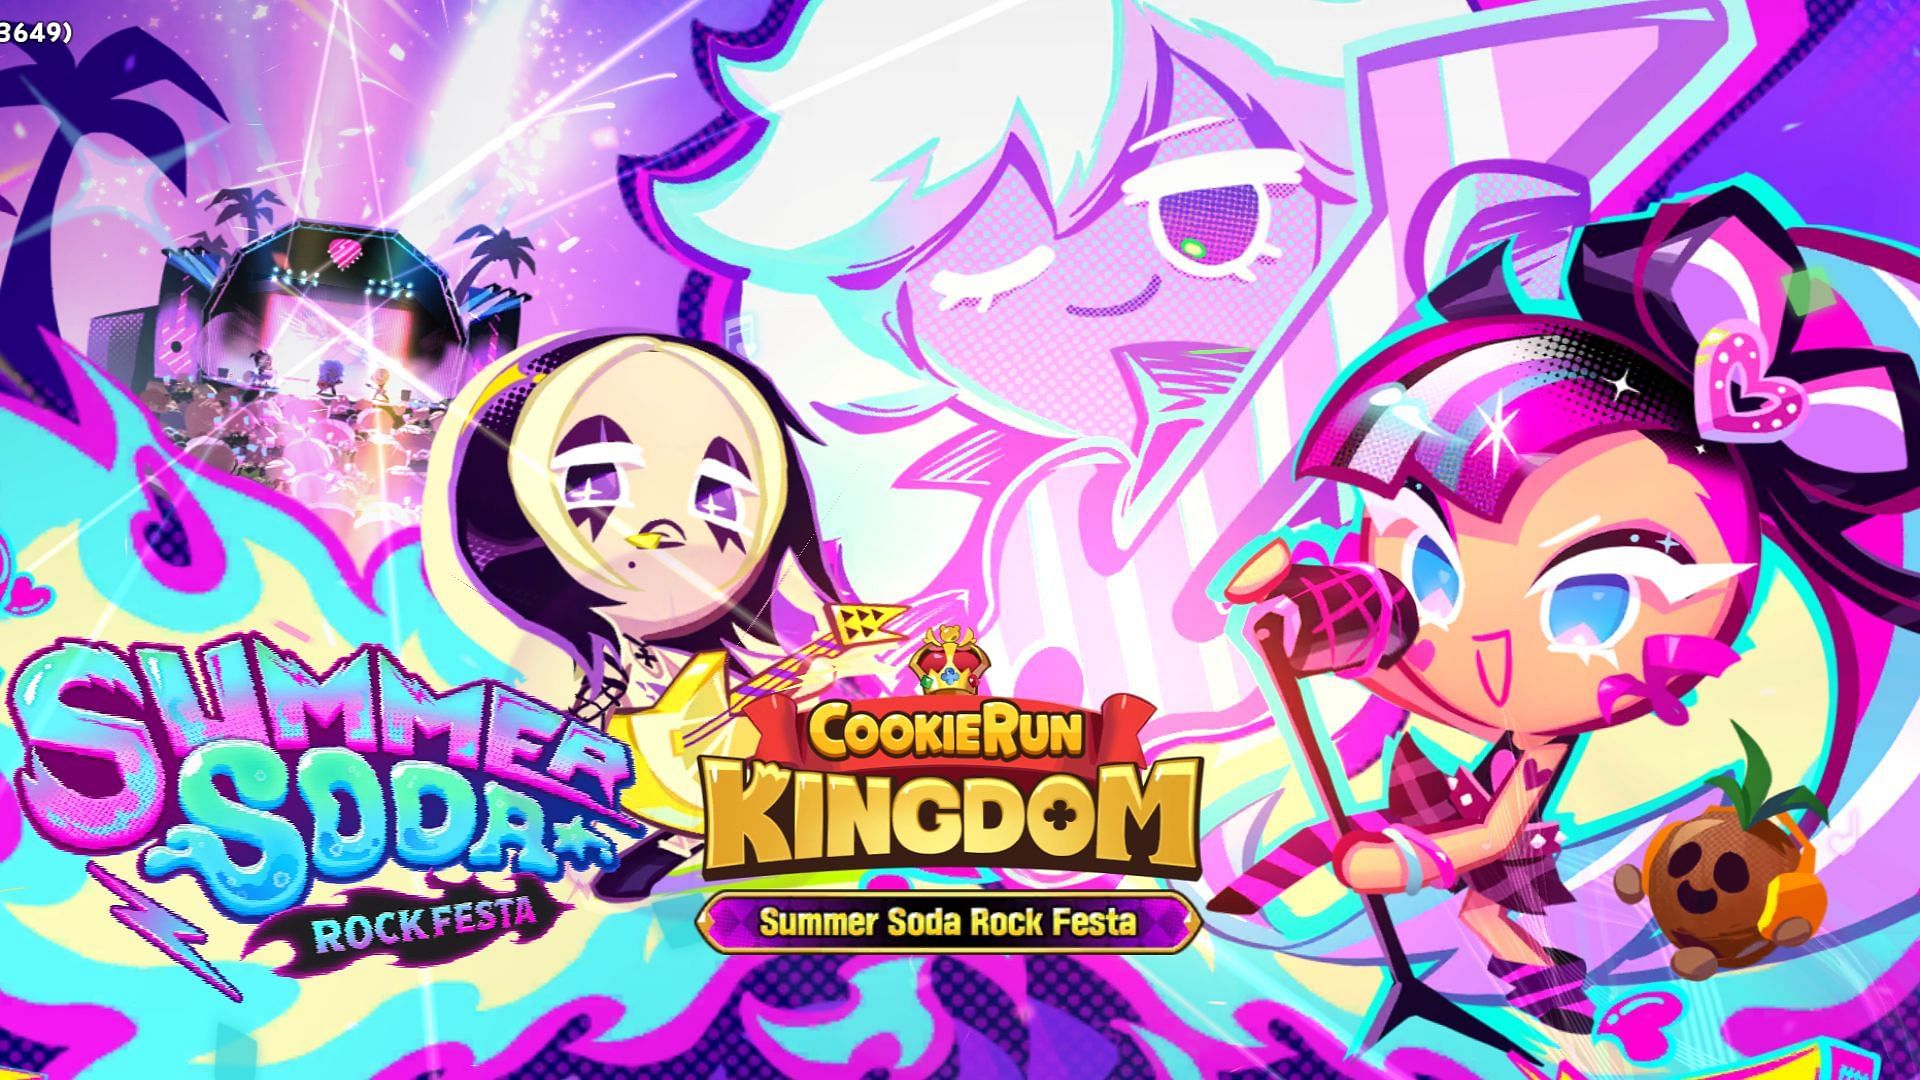 New Shining Glitter Cookie is introduced in the Cookie Run Kingdom